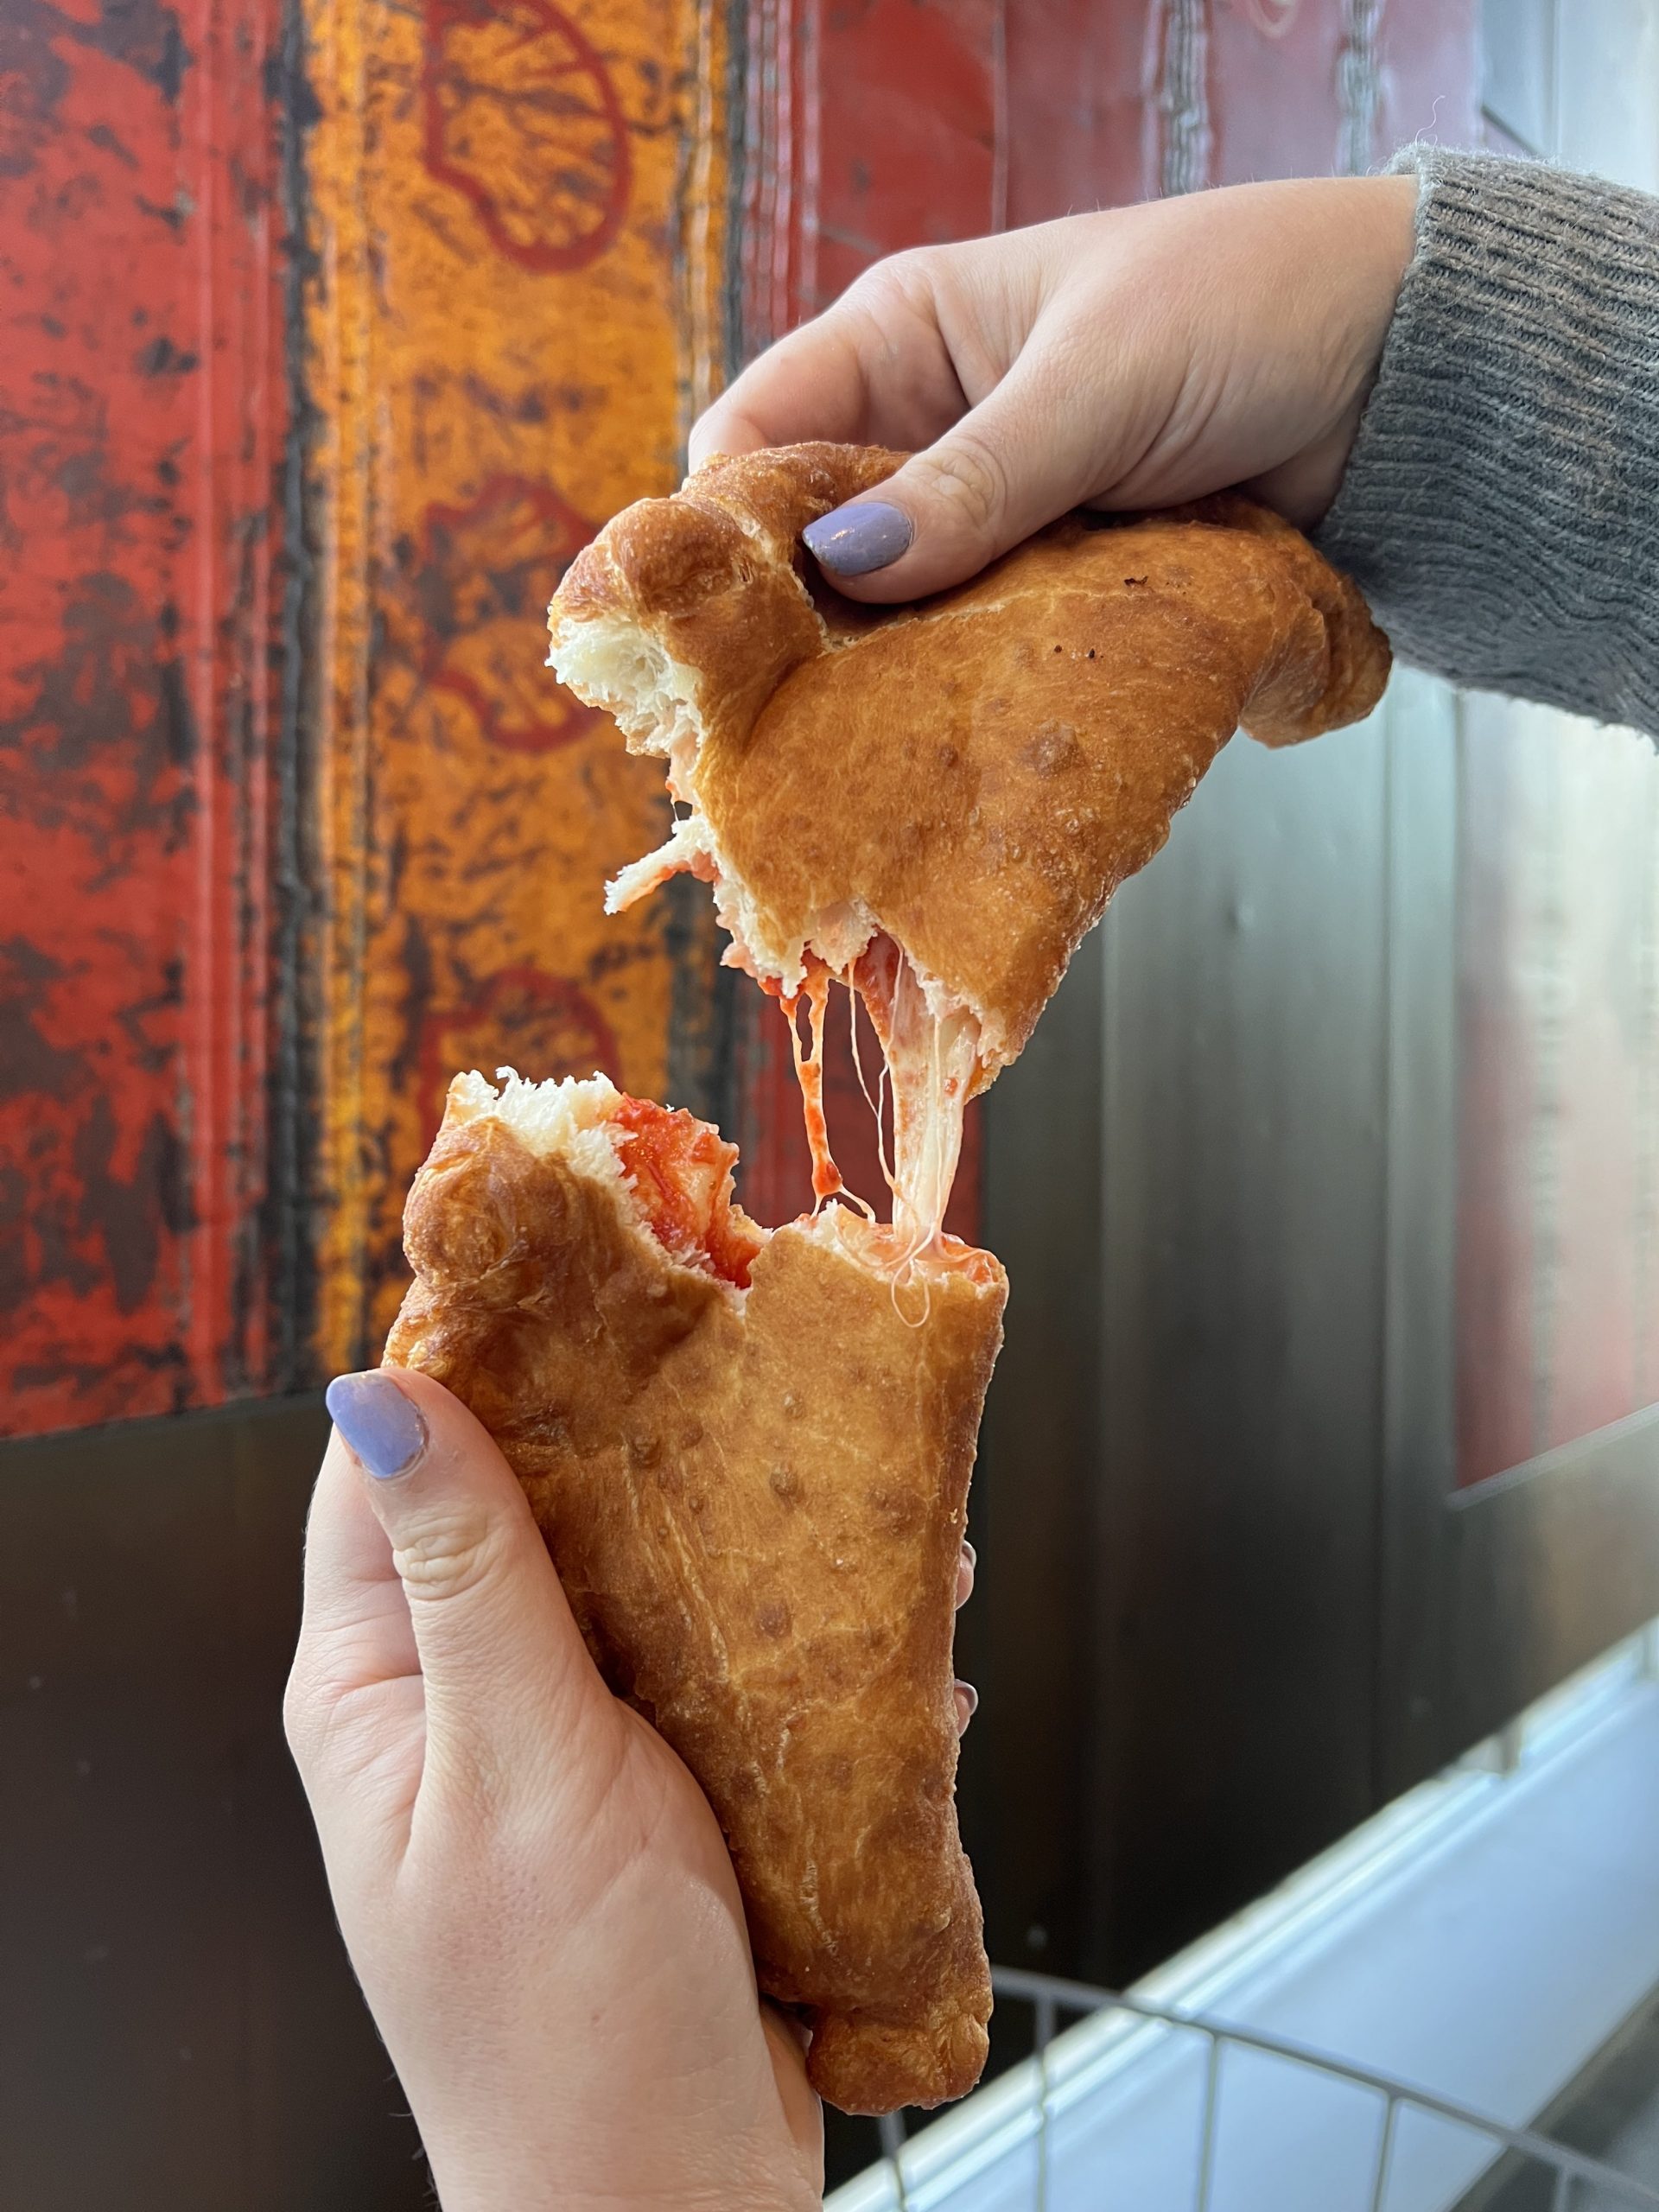 A deep fried calzone being pulled apart. 